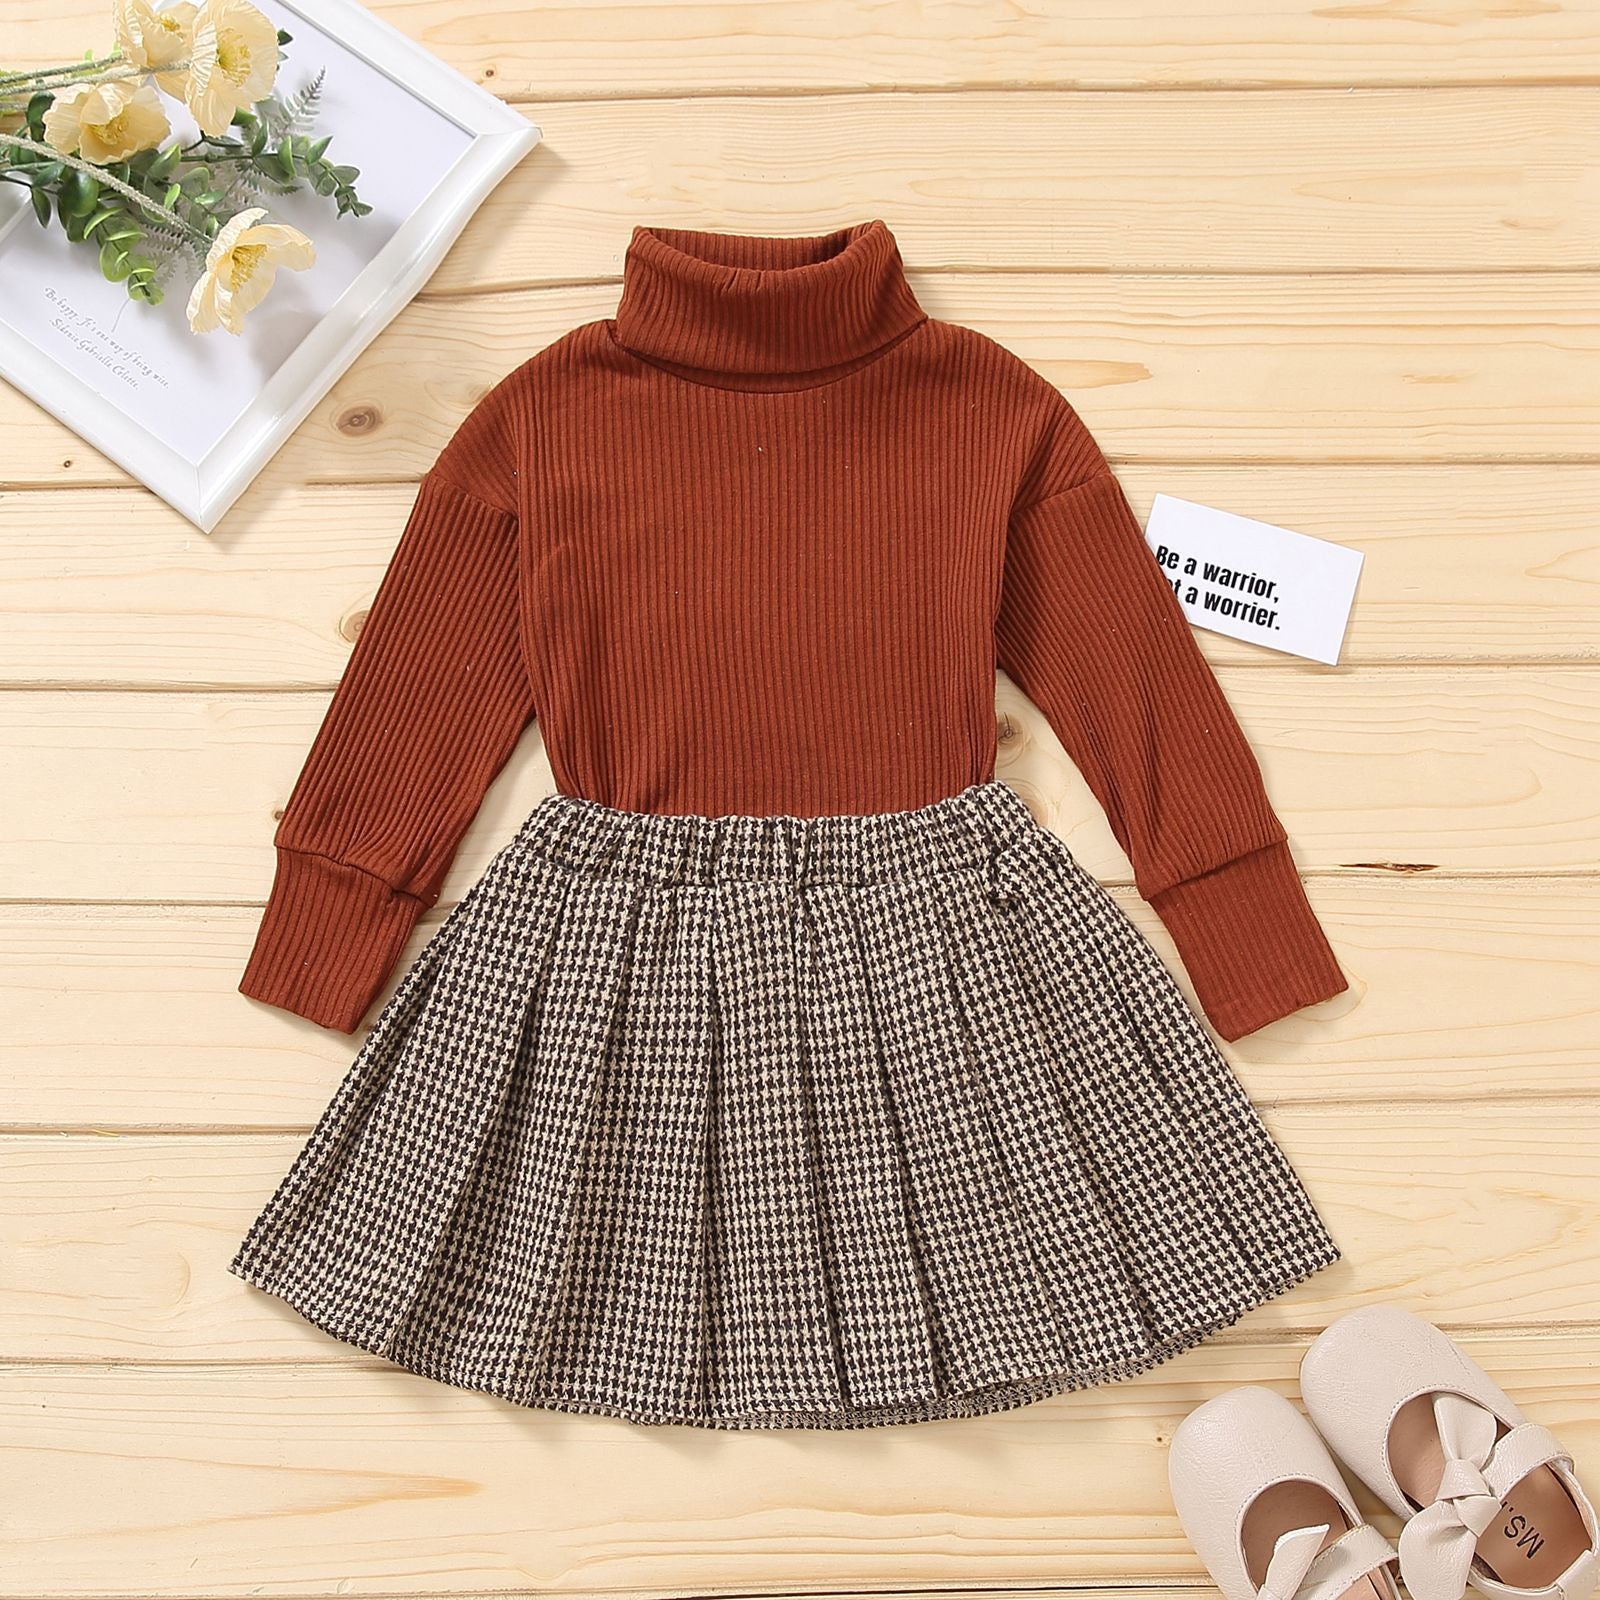 Kids Fall Skirts And Turtleneck Outfit